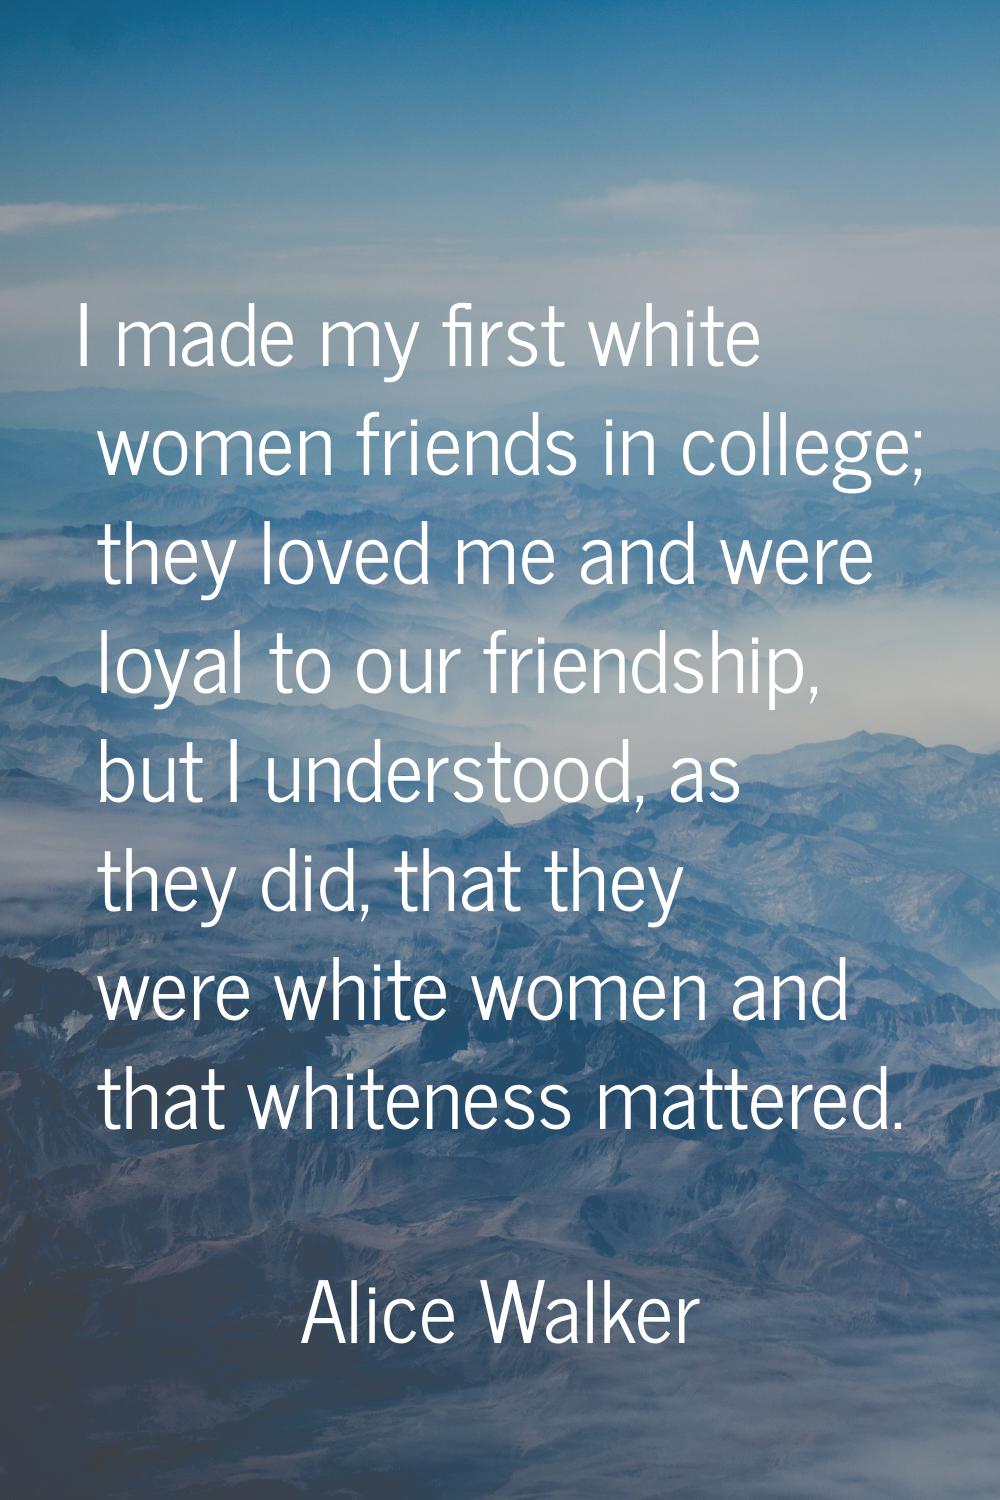 I made my first white women friends in college; they loved me and were loyal to our friendship, but